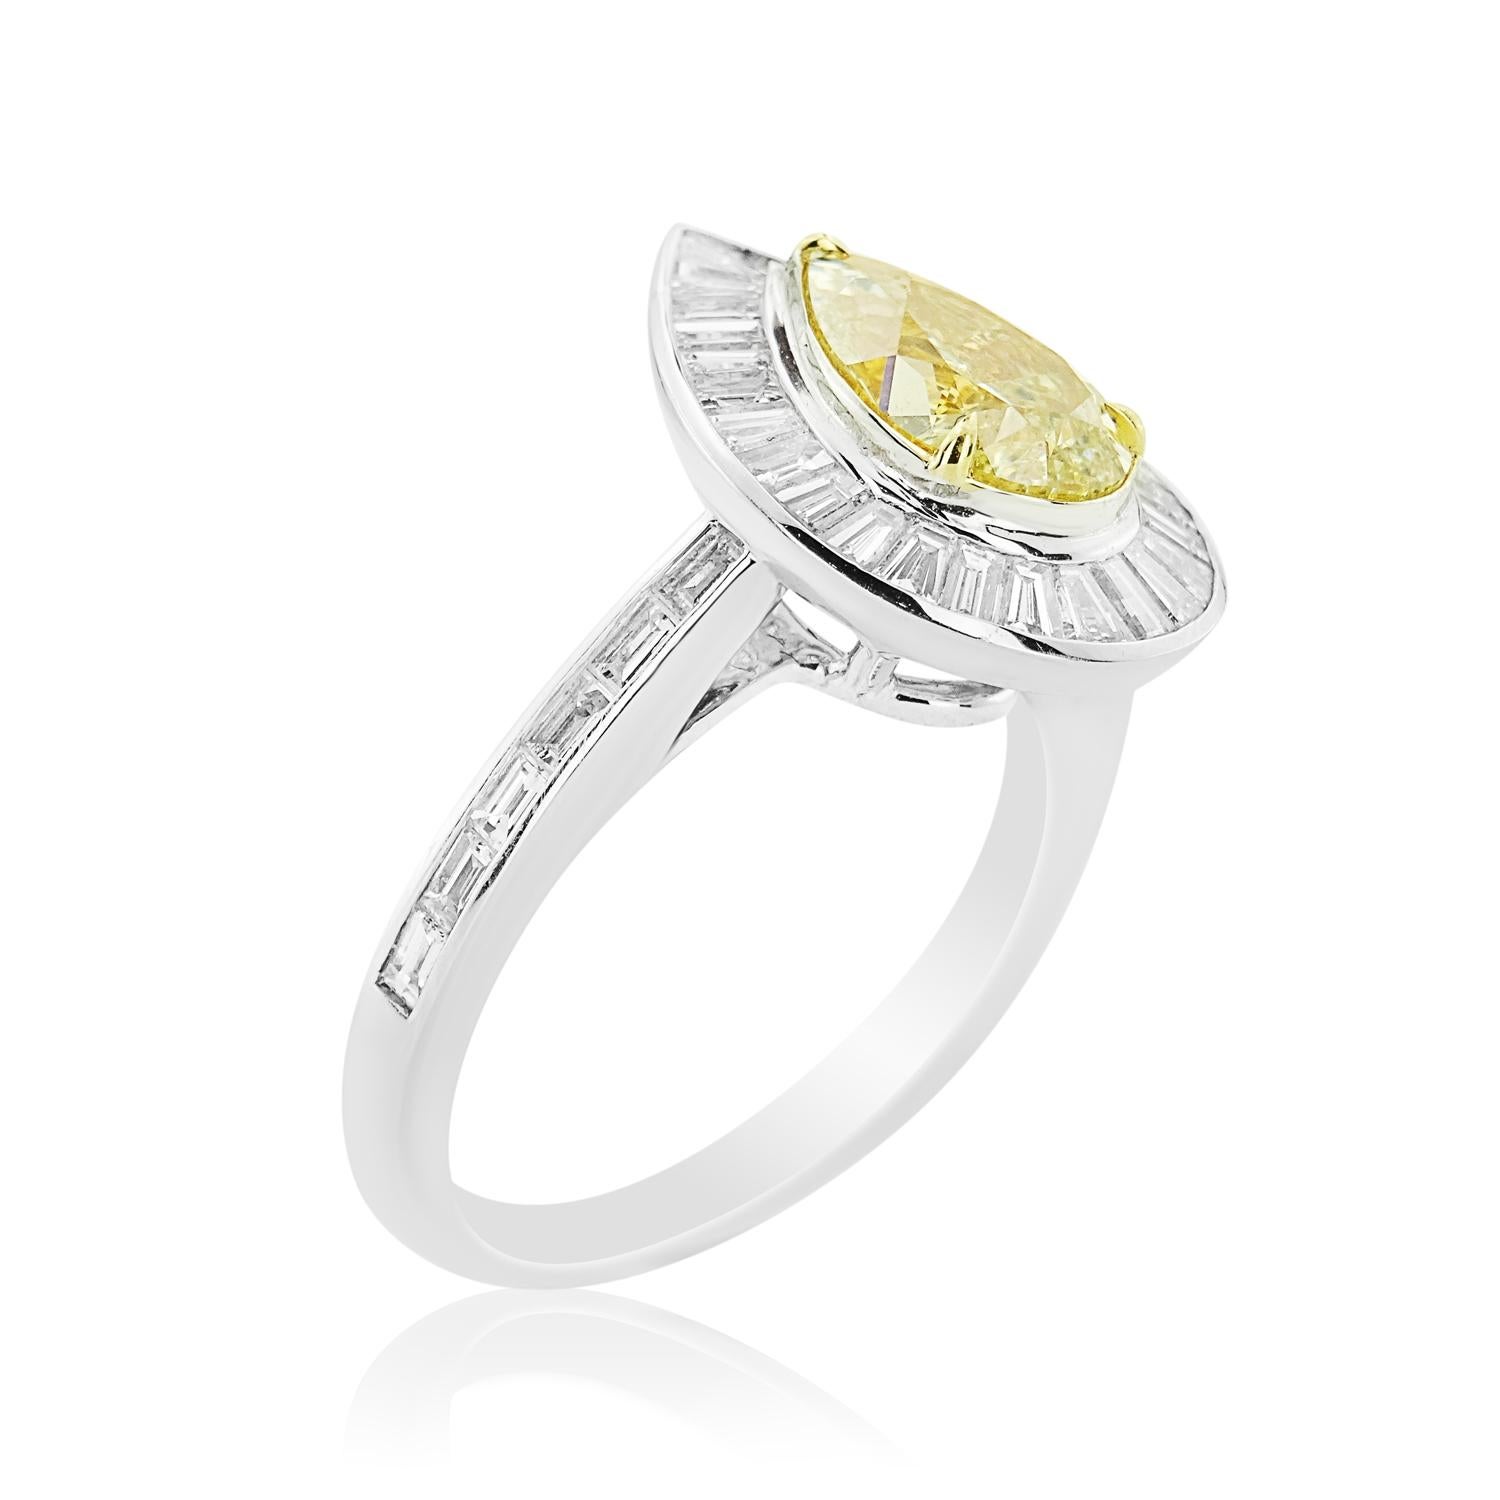 PEAR CUT FANCY YELLOW DIAMOND RING - 3.08 CT


Set in 18Kt White gold


Pear cut diamond weight: 1.60 ct
[ 1 diamond ]
Color: Natural Fancy Yellow
Clarity: VS2

Total diamond weight: 1.48 ct
[ 40 diamonds ]
Color: H
Clarity: VS

Total ring weight: